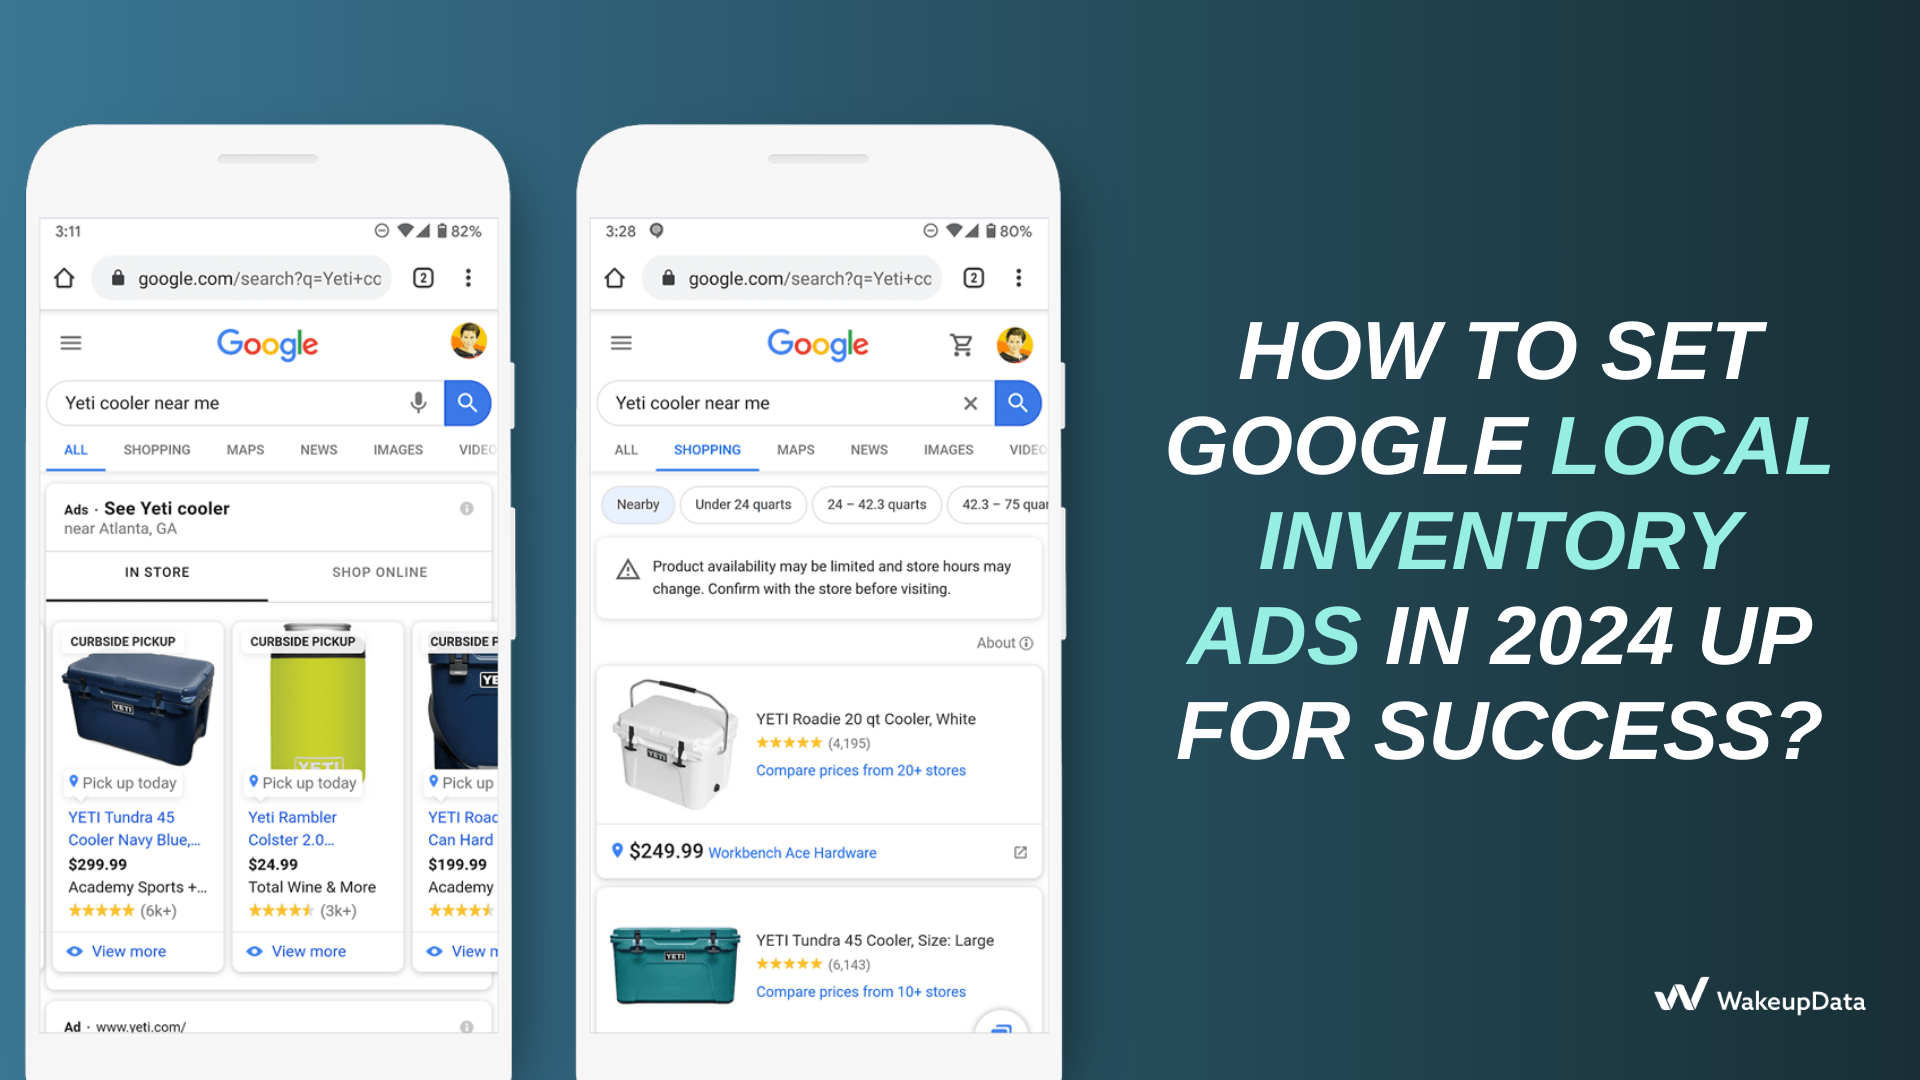 How to set Google Local Inventory Ads in 2024 up for success?